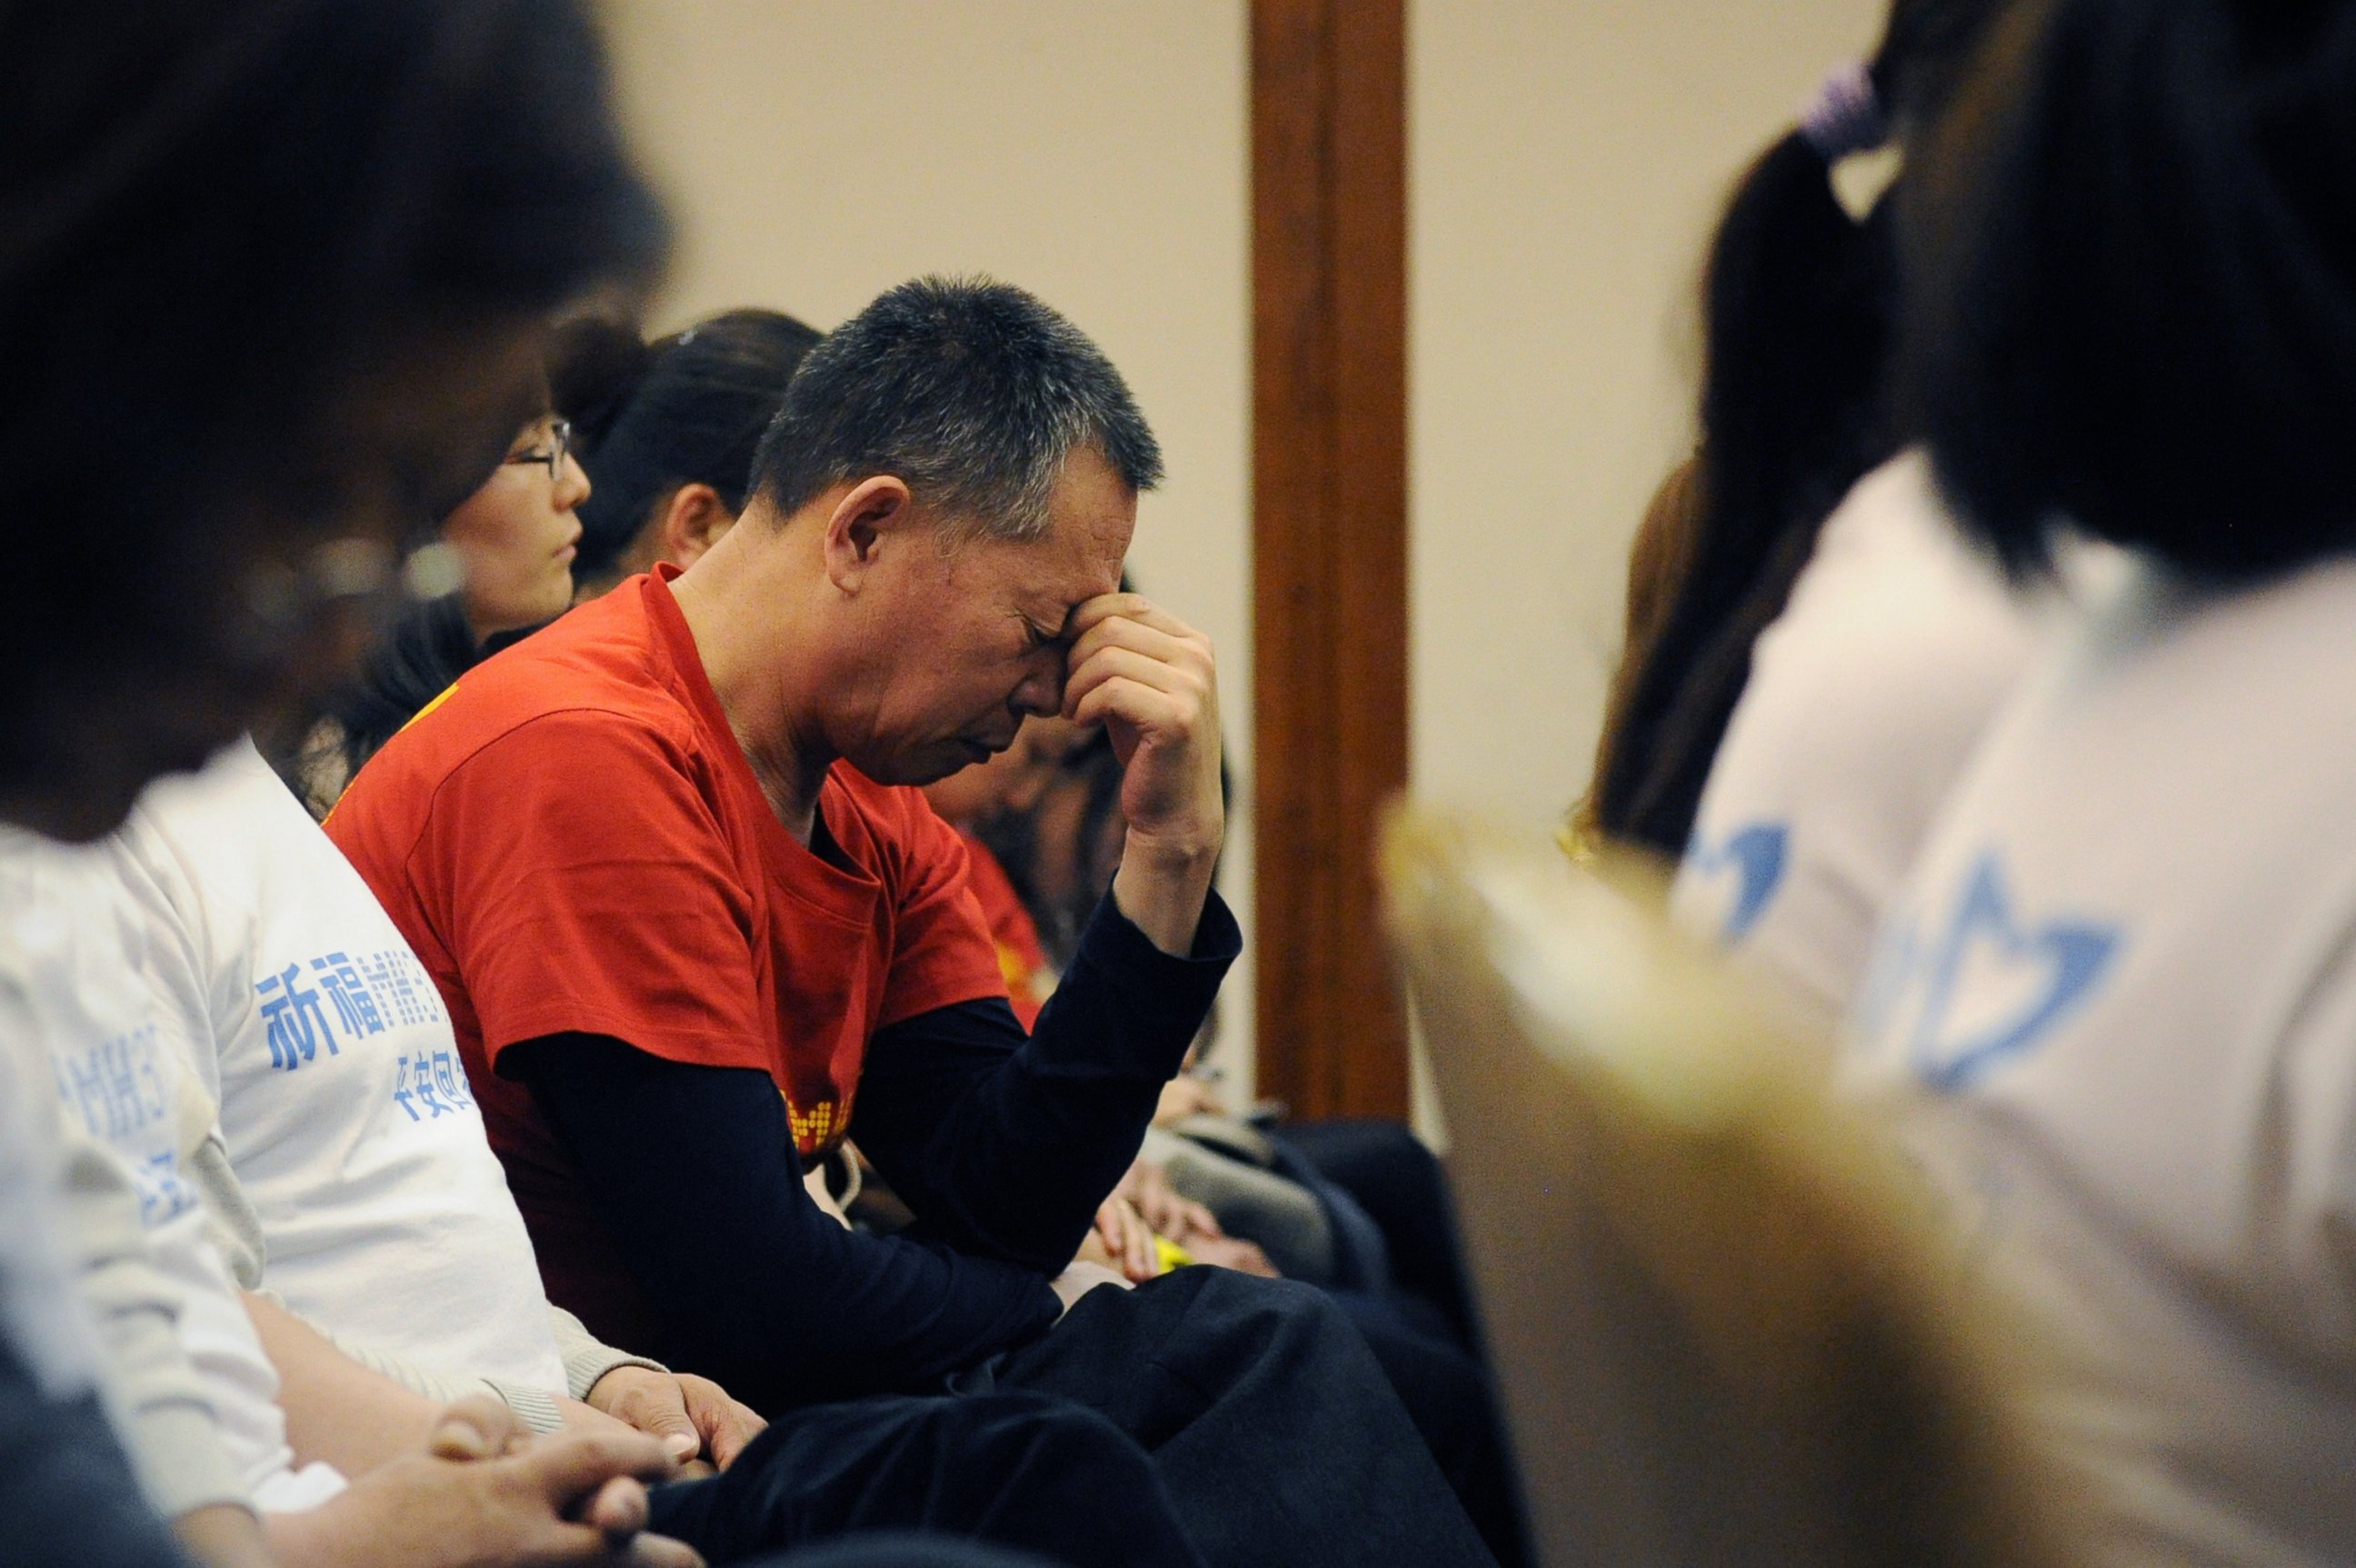 PHOTO: A man reacts as Chinese relatives of passengers on the missing Malaysia Airlines flight MH370 attend a meeting at the Metro Park Hotel in Beijing on April 21, 2014. 